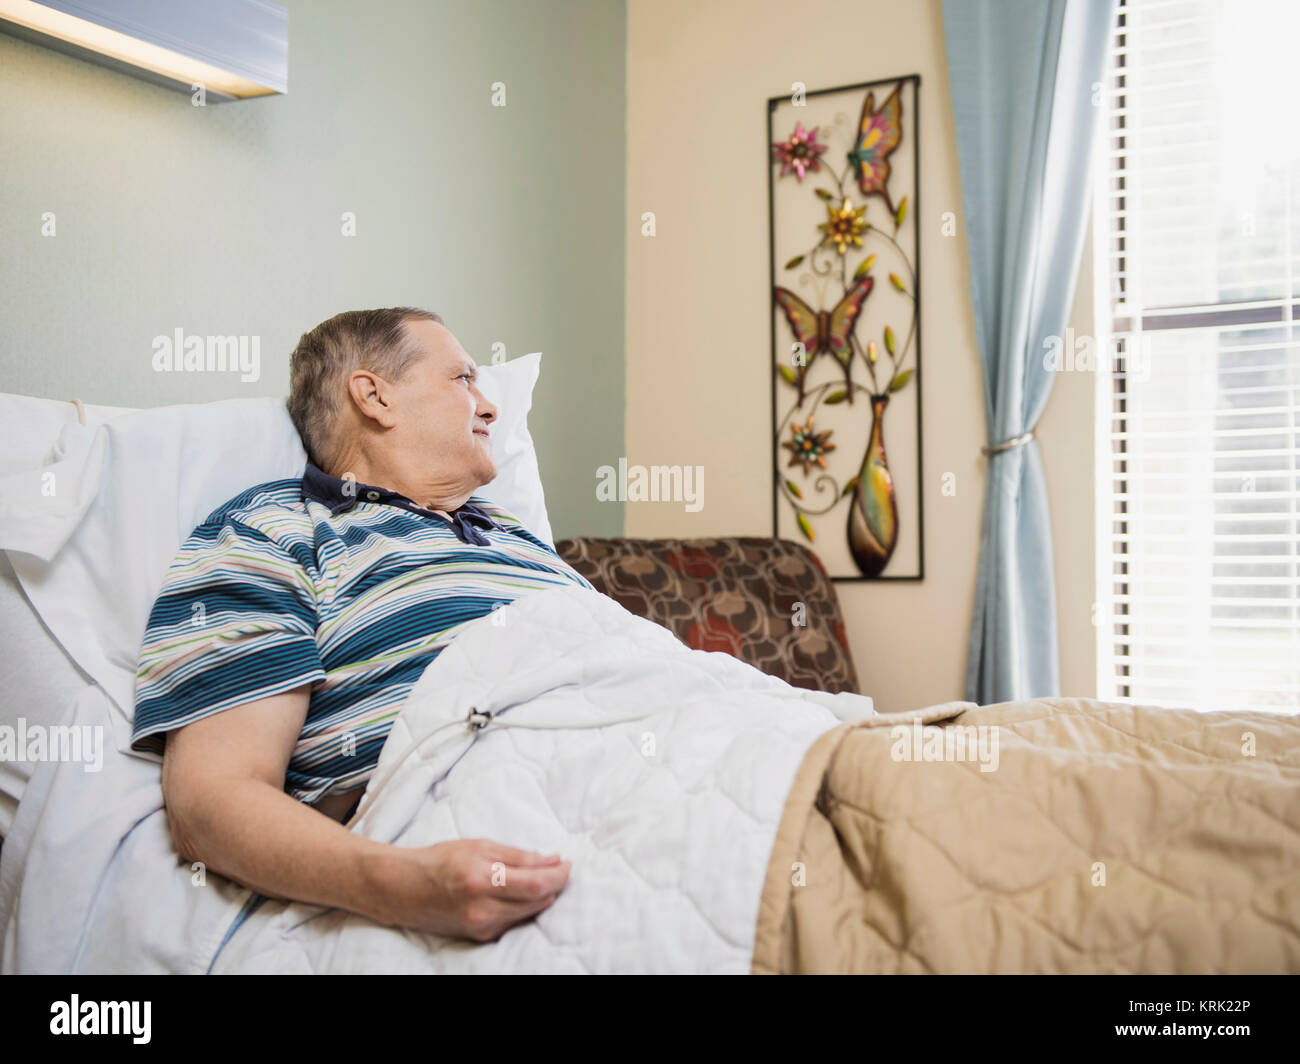 Caucasian man laying in bed Stock Photo